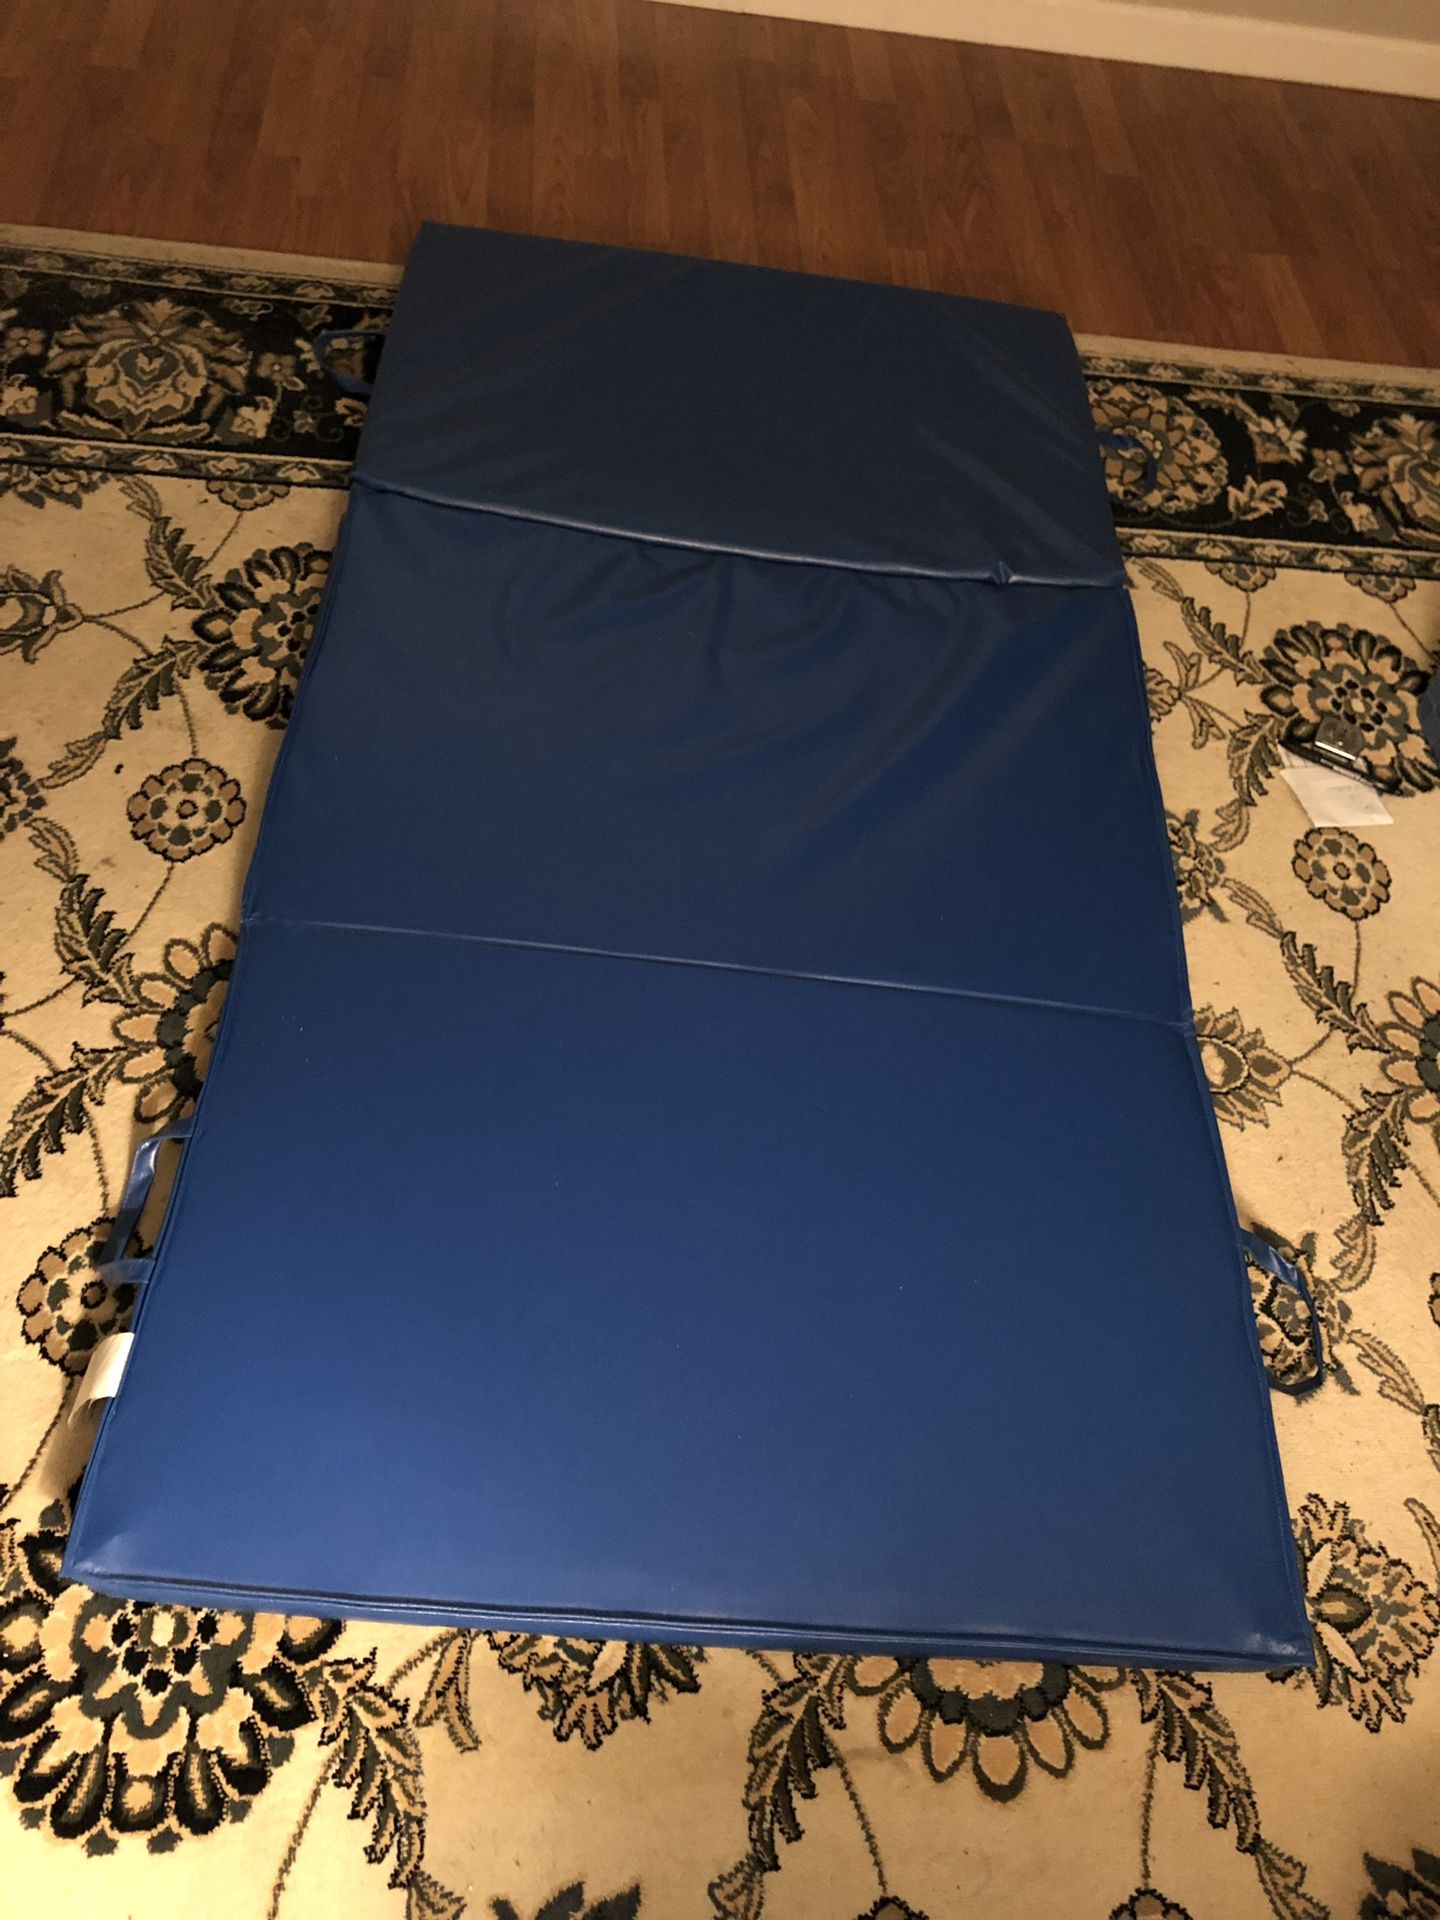 2" Thick Tri-Fold Exercise Mat with Carrying Handles